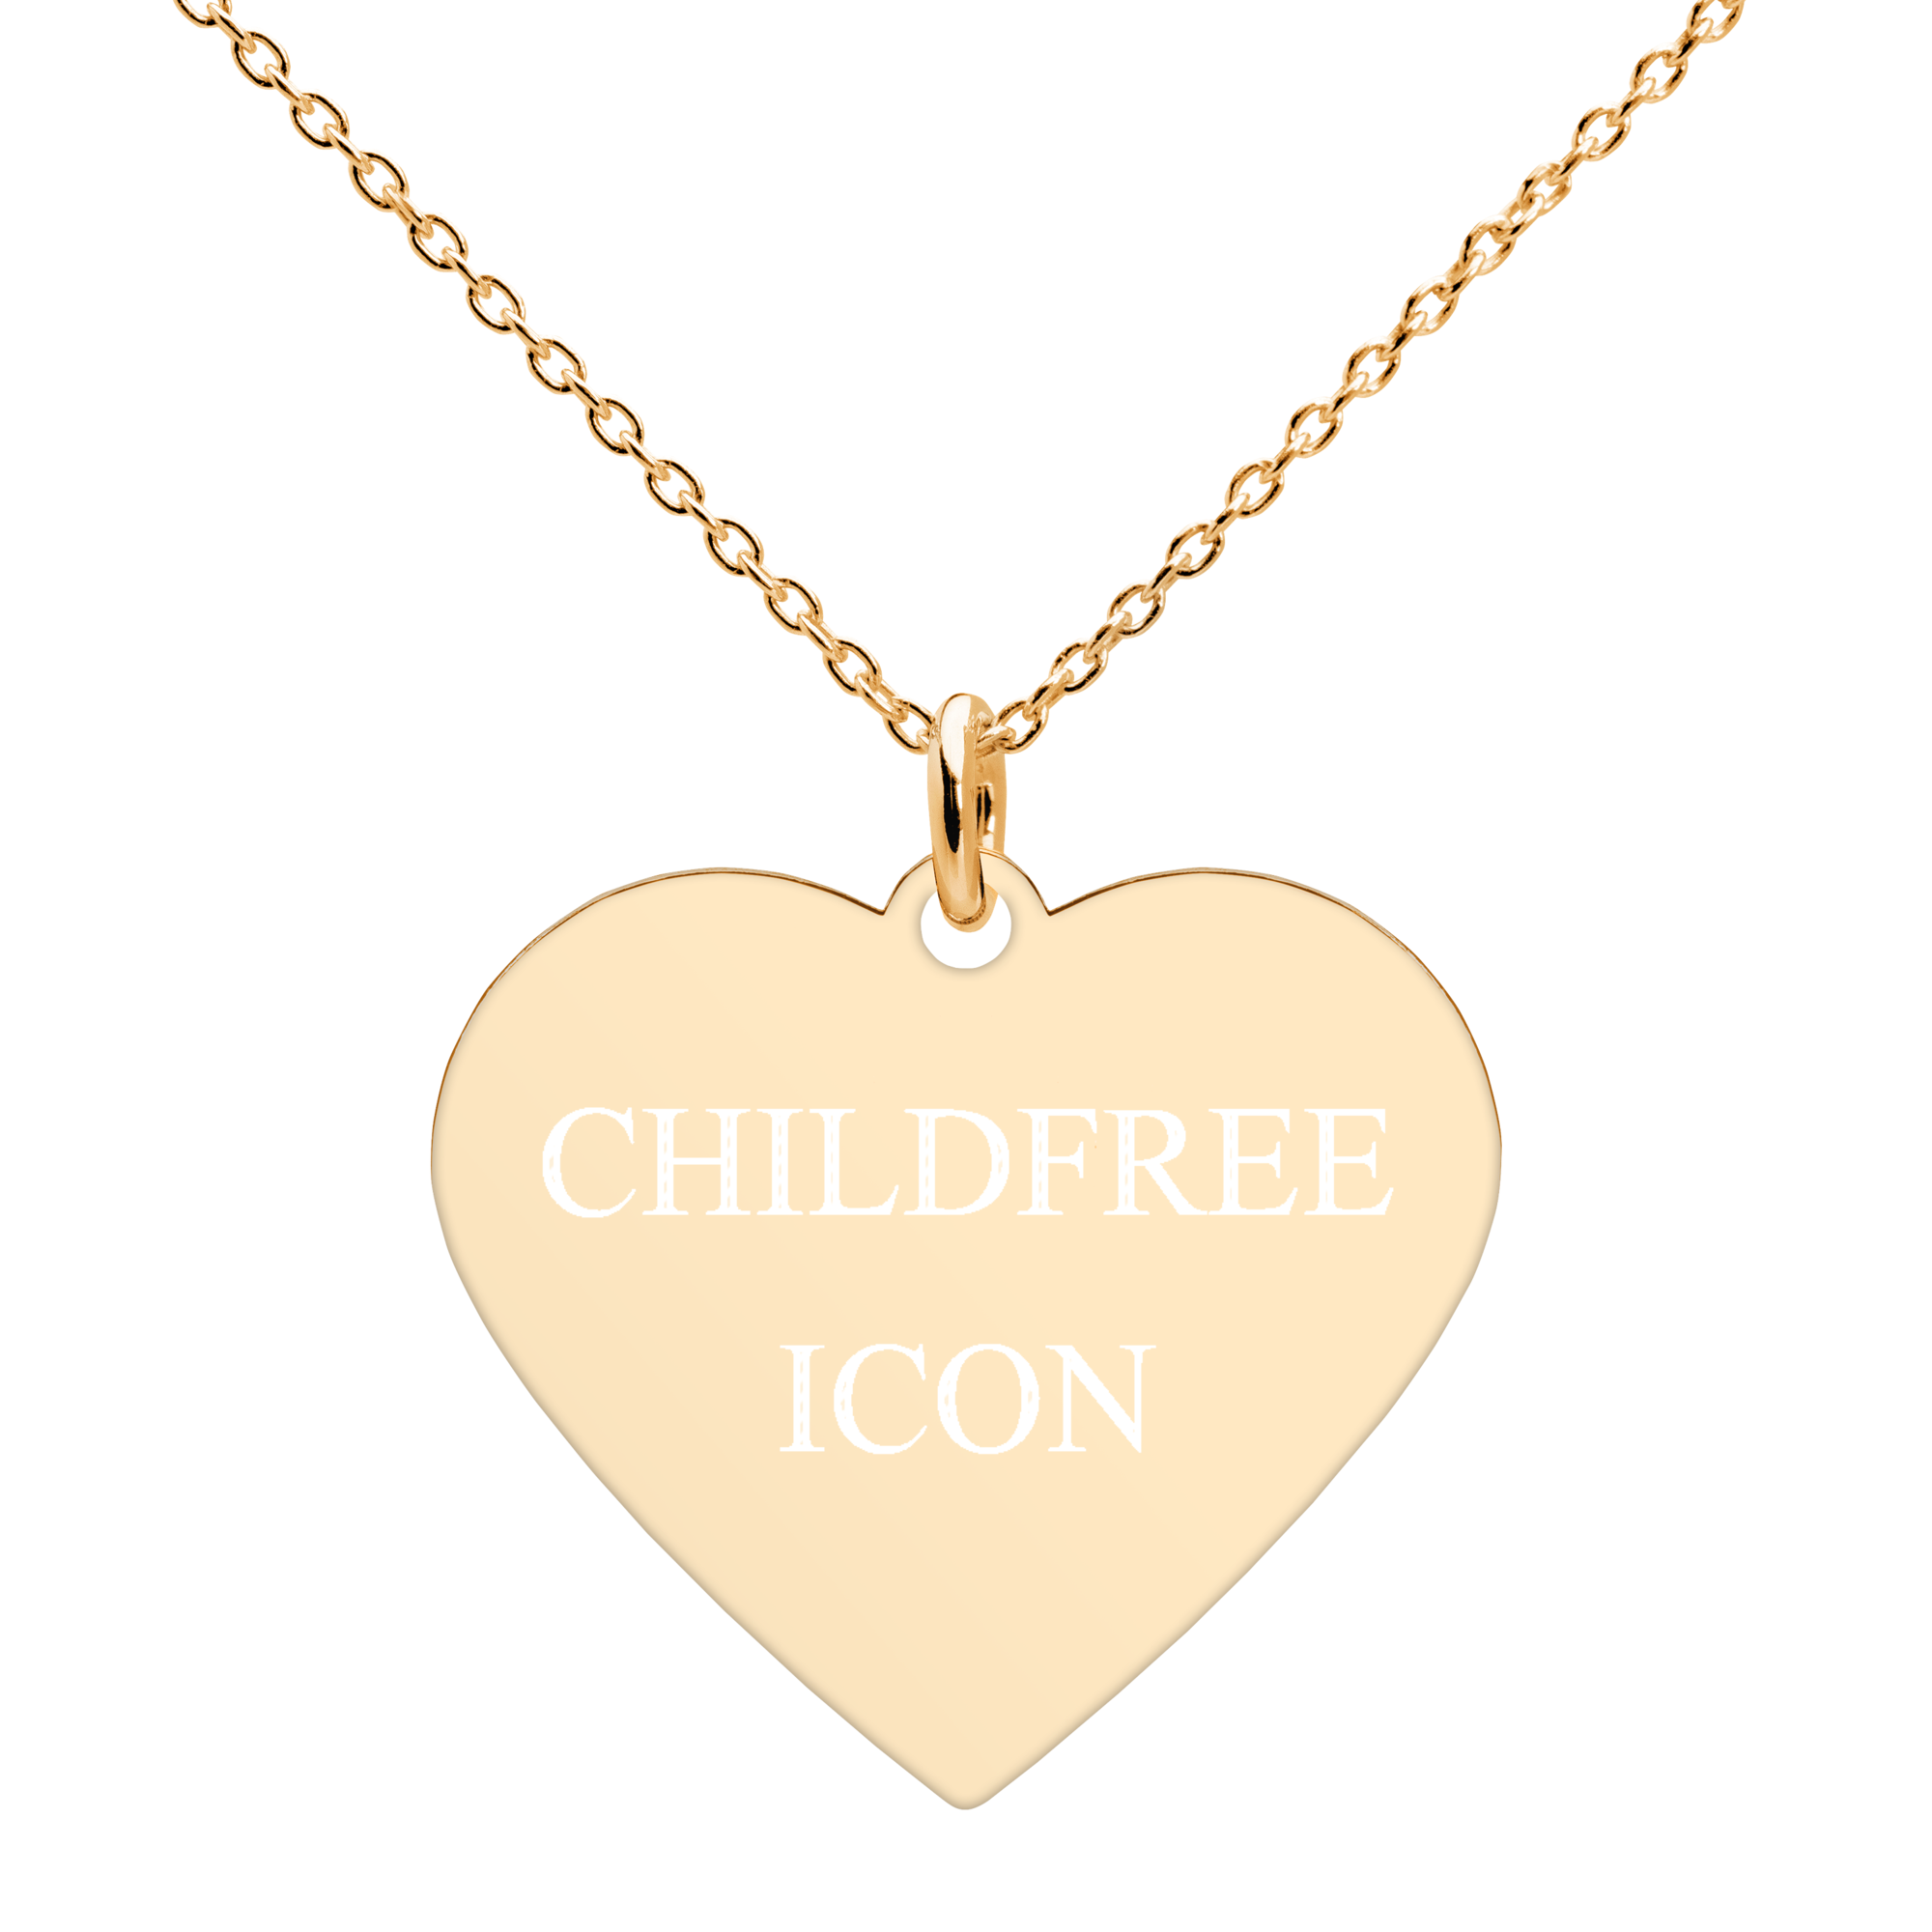 Childfree Icon Member Exclusive engraved heart necklace 24k gold